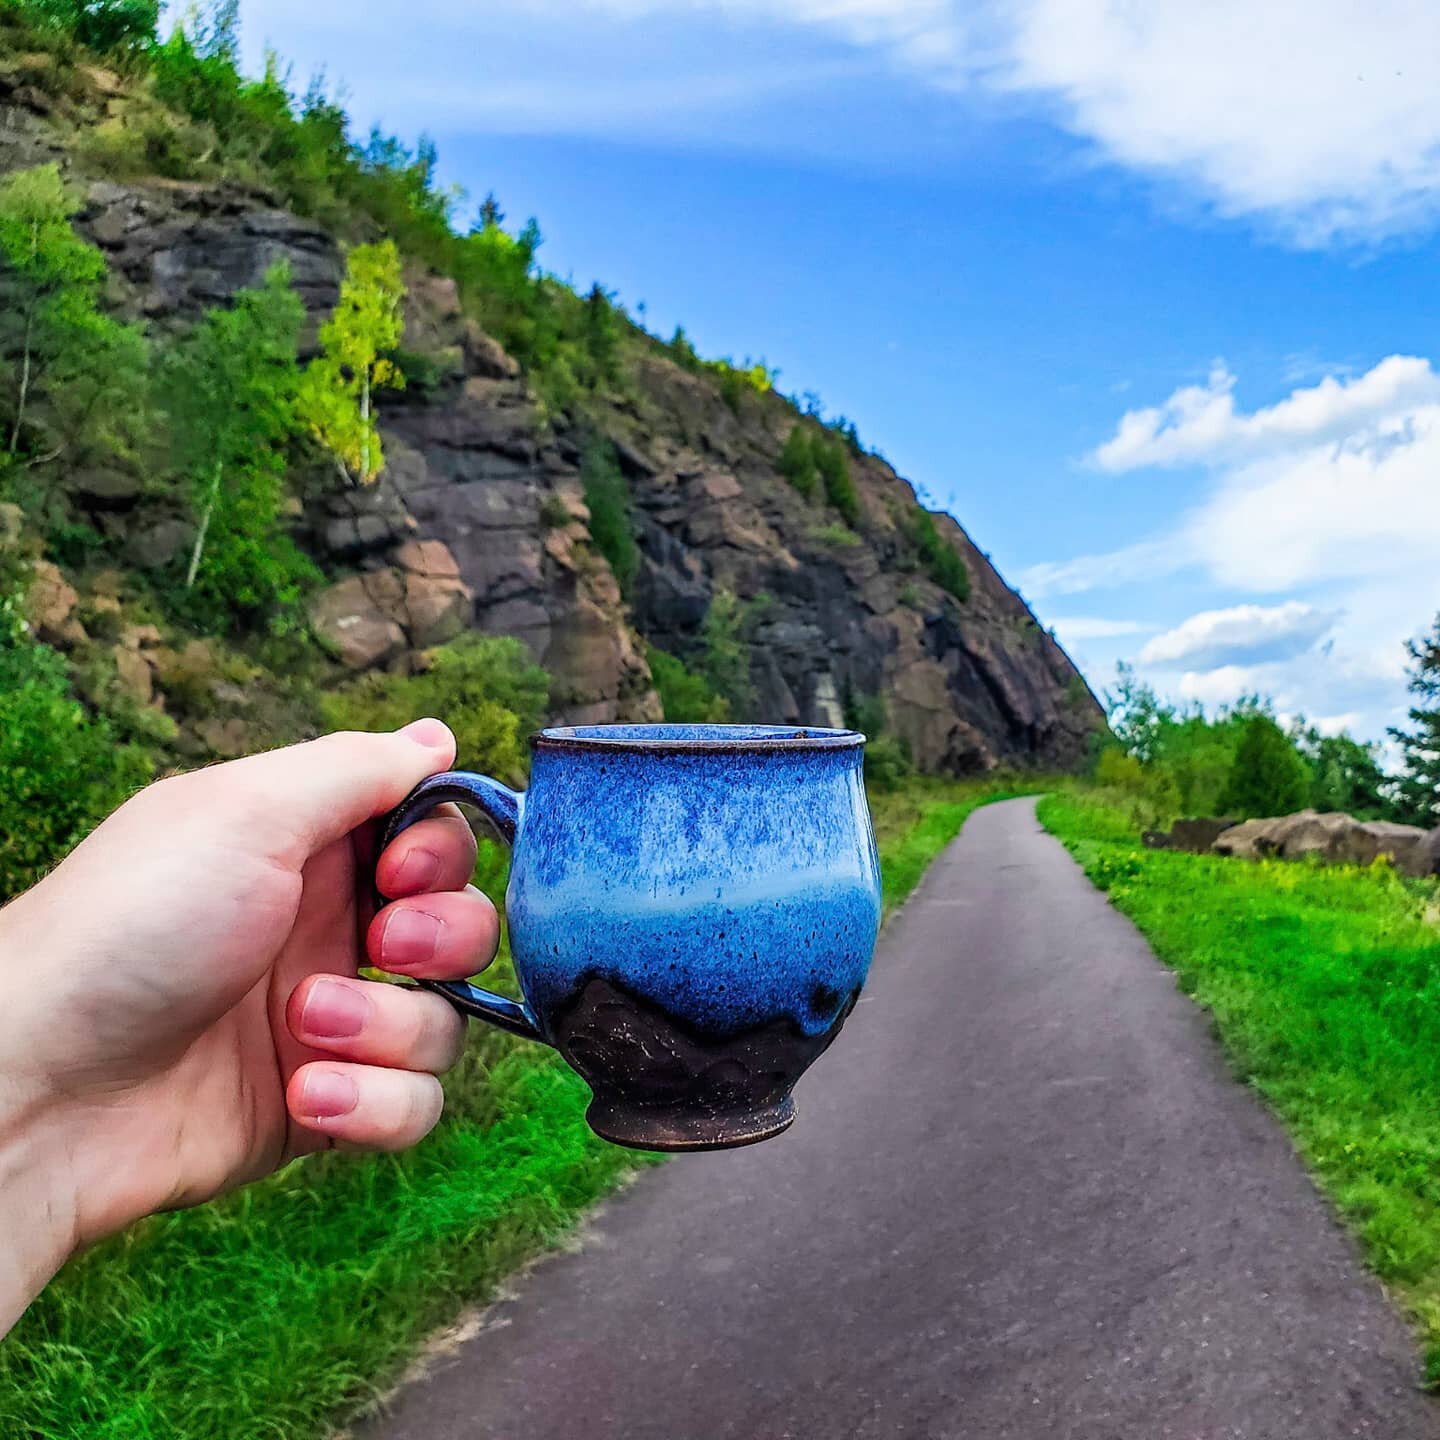 Finally had the chance to visited the North Shore in Minnesota again!
.
.
.
#coffeeaddict #hike #lakesuperiorphotography #minnesotamade #lakesuperiorlife #coffeeoftheday #coffeemug #captureminnesota #minnesotaexposure #cliff #northshorephotographer #